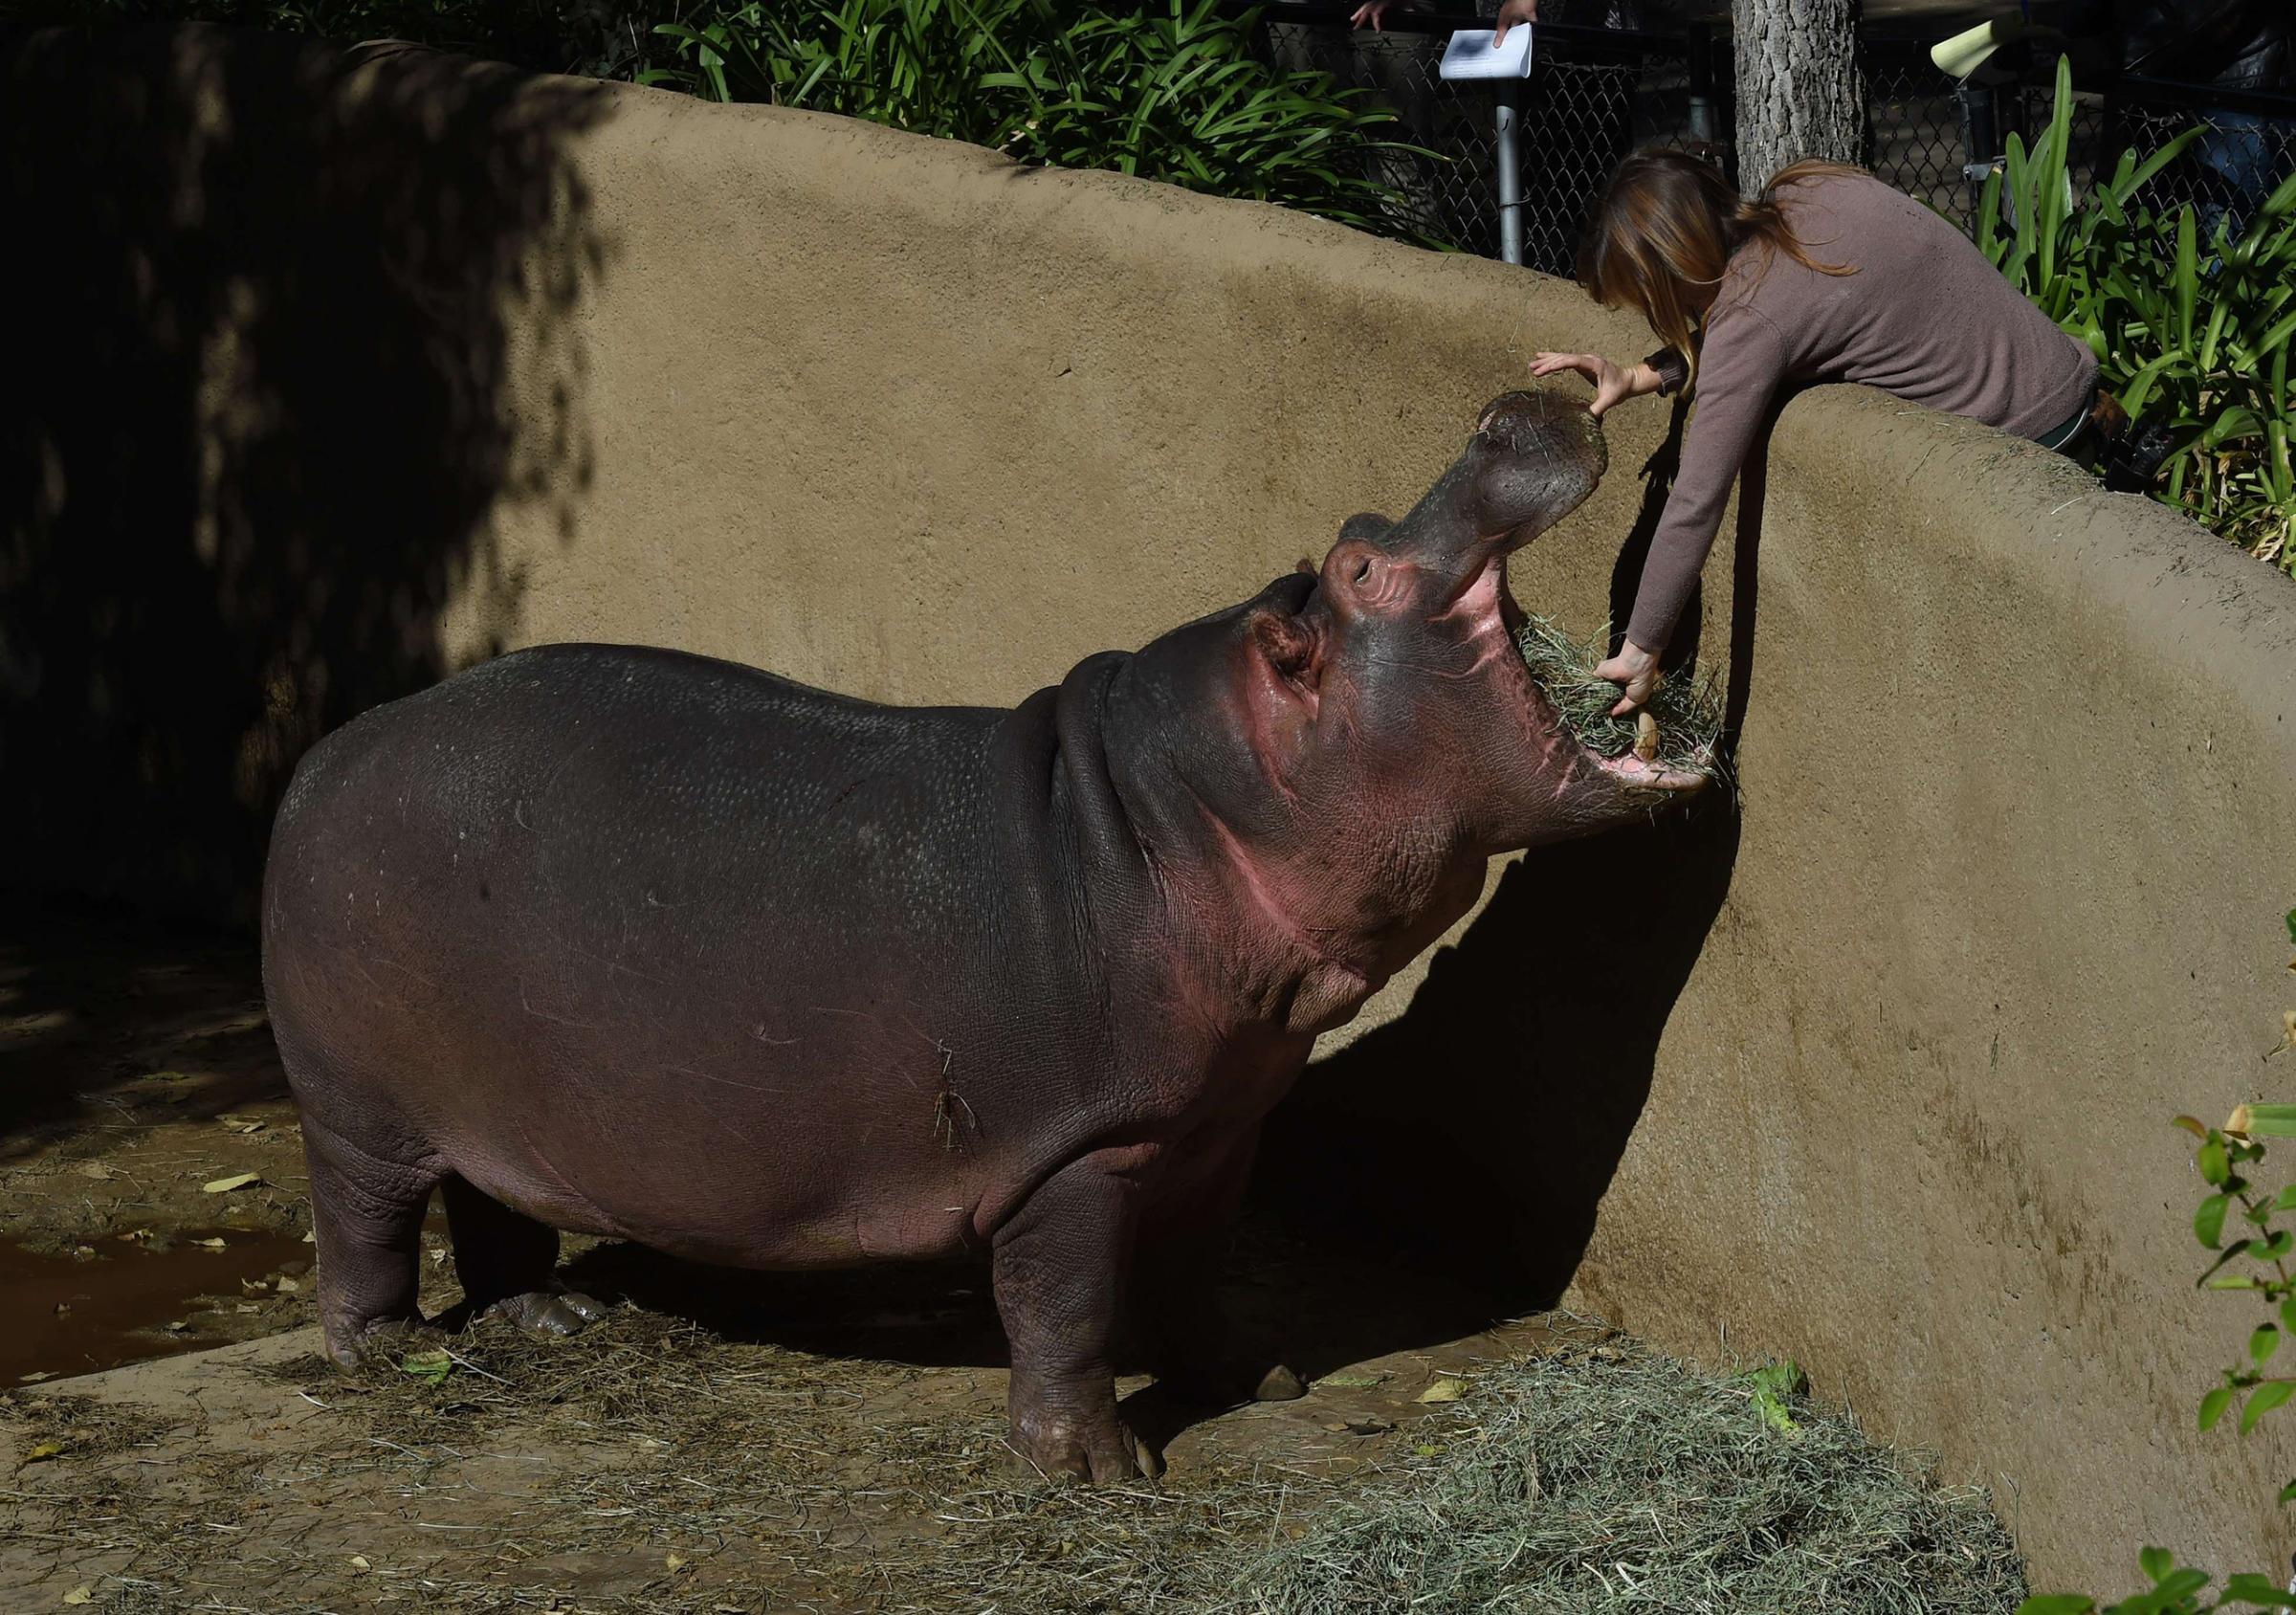 The Los Angeles Zoos male Hippopotamus named Adhama, father of the newborn calf (nameless at the moment) in their compound at the zoo in Los Angeles, Ca. on Nov. 4, 2014.